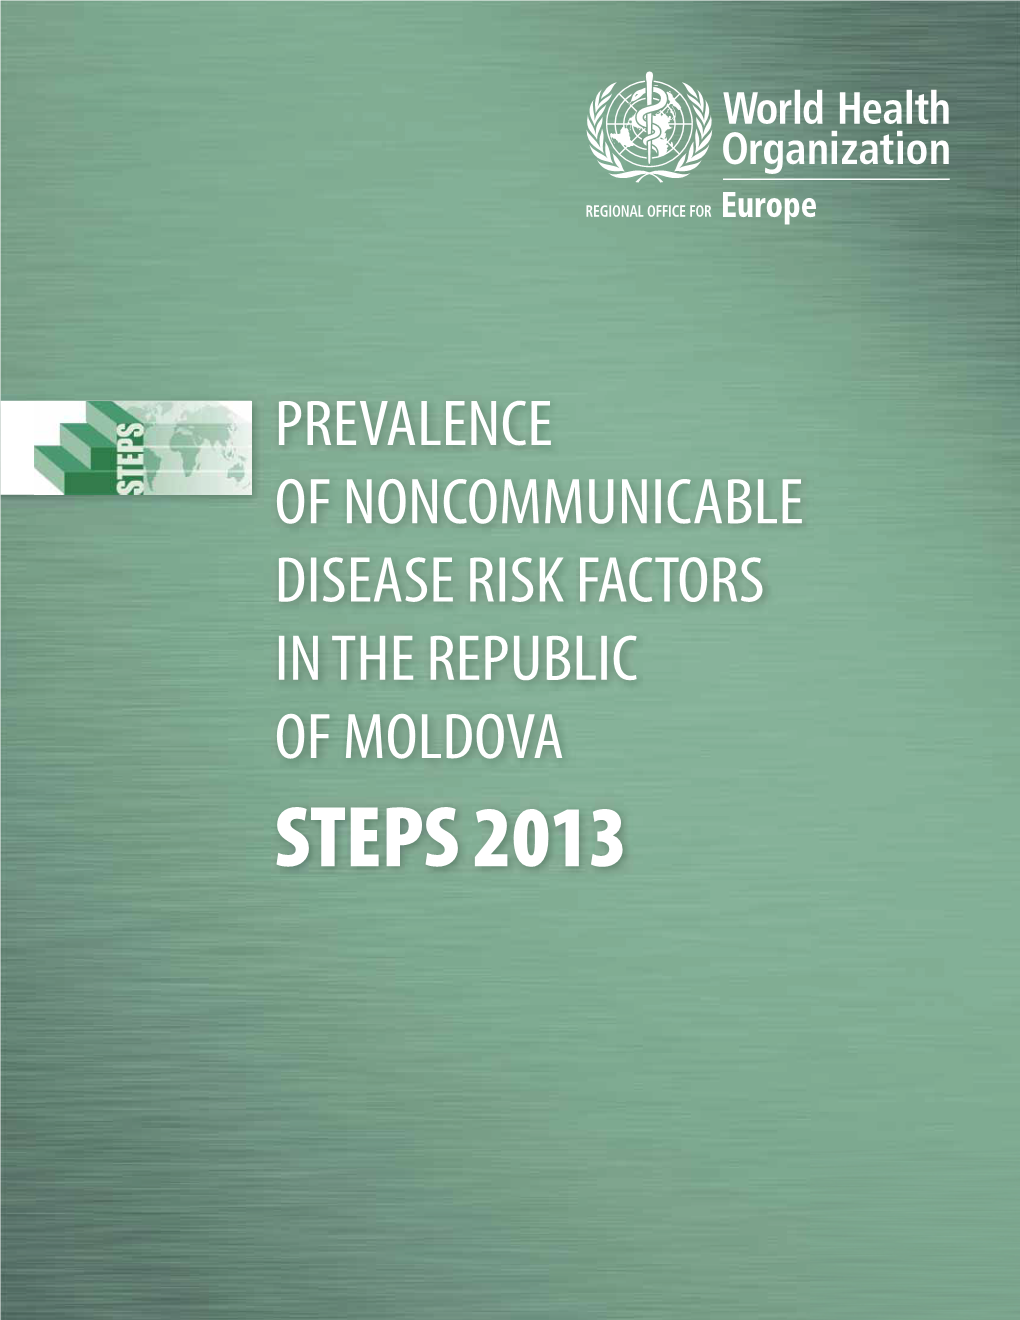 Steps 2013 Prevalence of Noncommunicable Disease Risk Factors in the Republic of Moldova Steps 2013